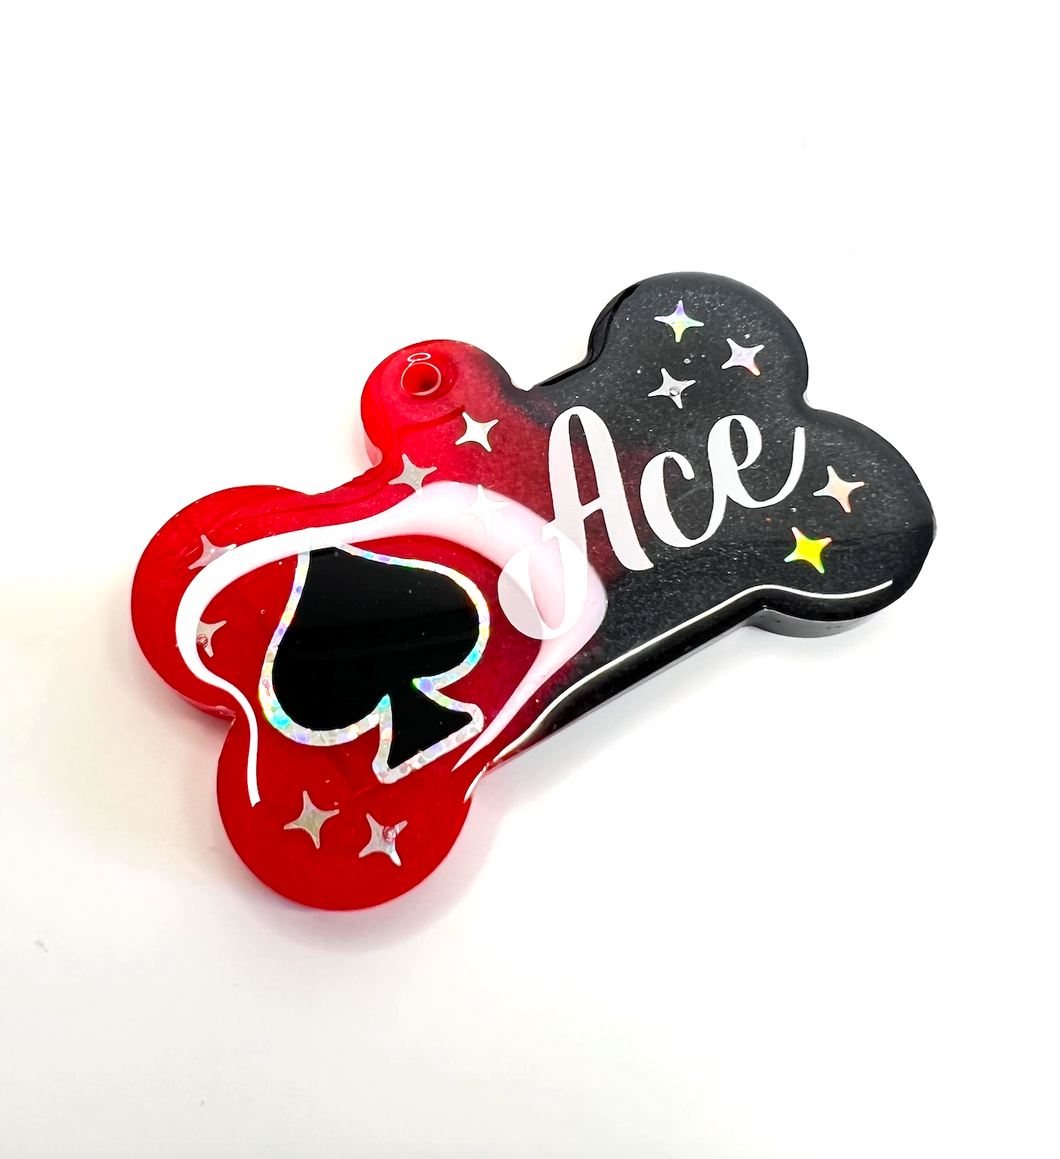 Ace of Spades Tag